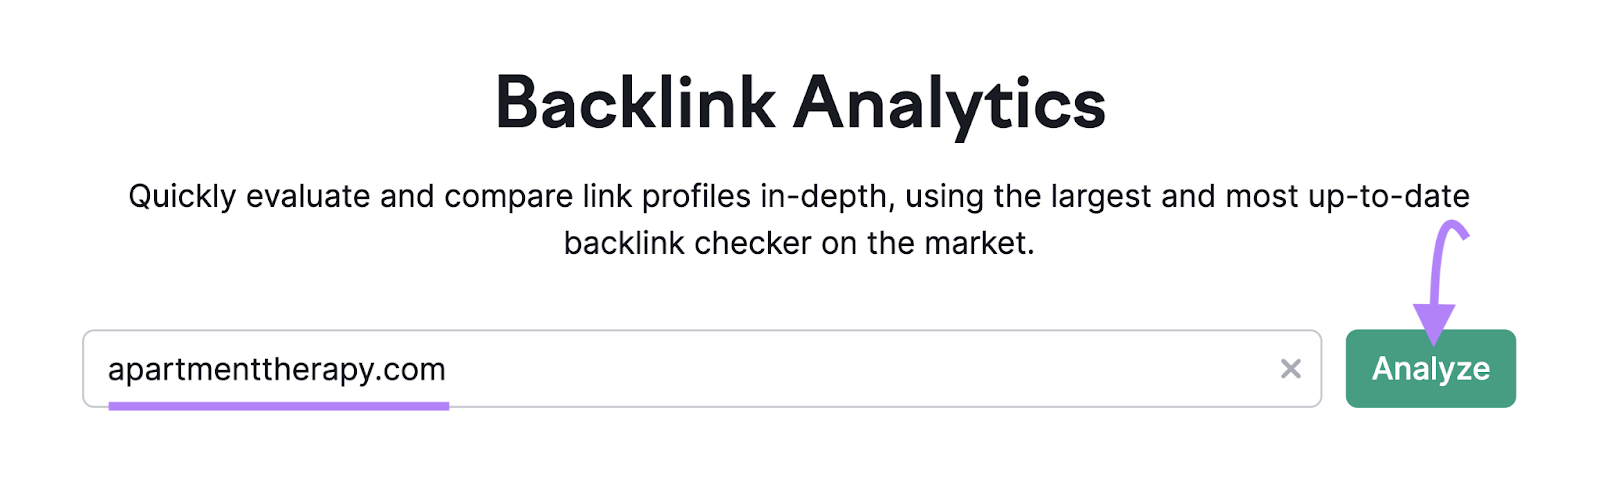 "apartmenttherapy.com" entered into the Backlink Analytics tool search bar